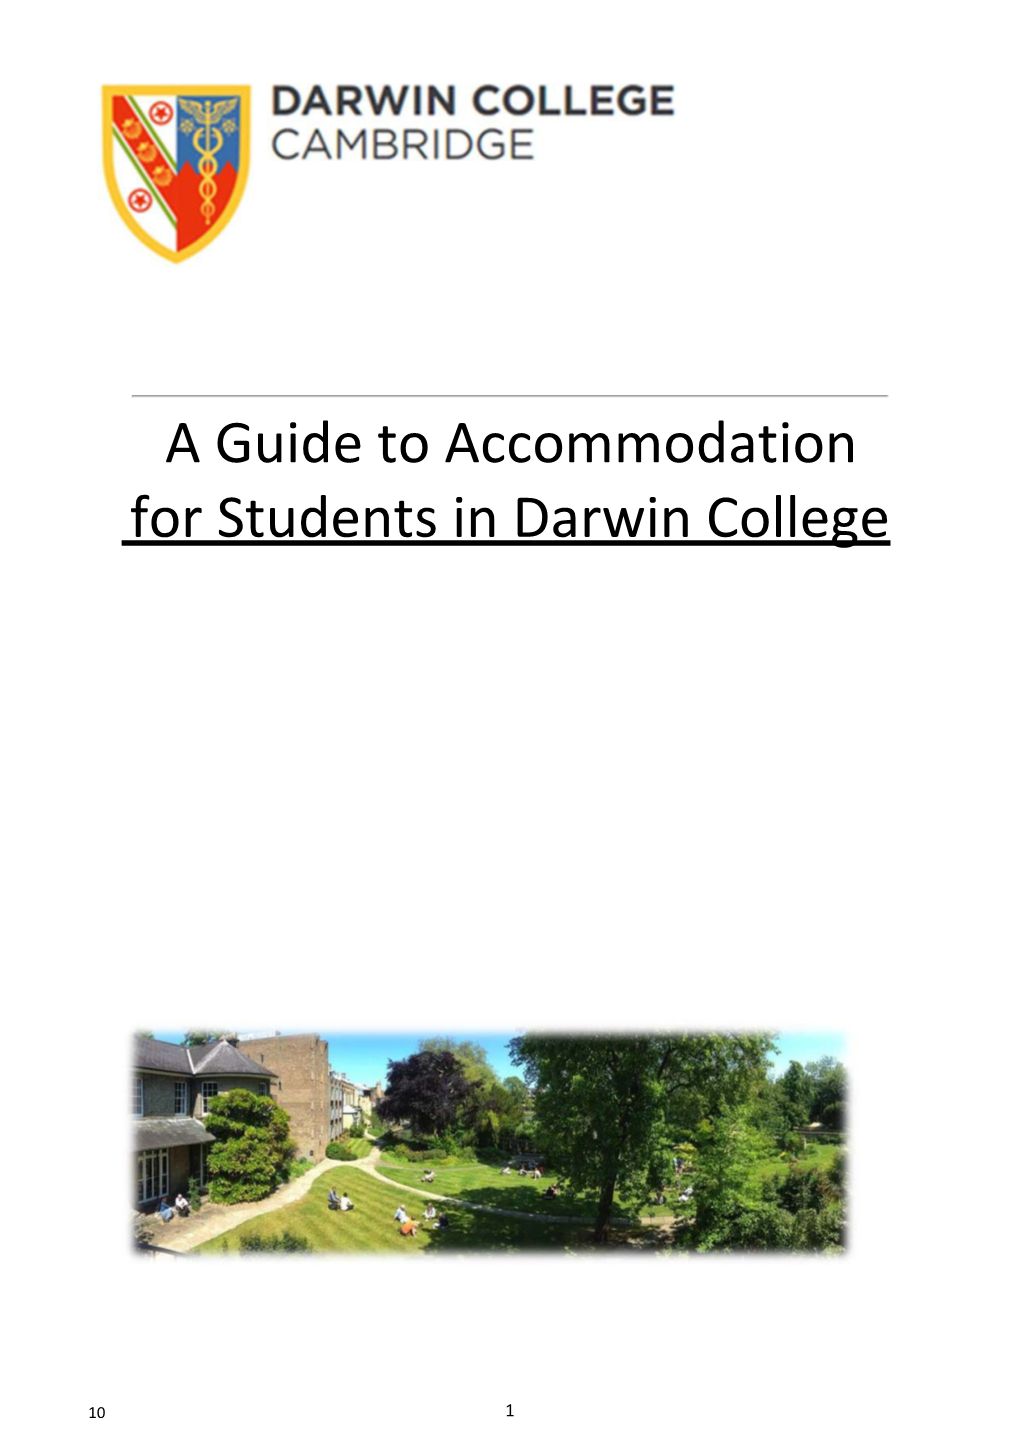 A Guide to Accommodation for Students in Darwin College